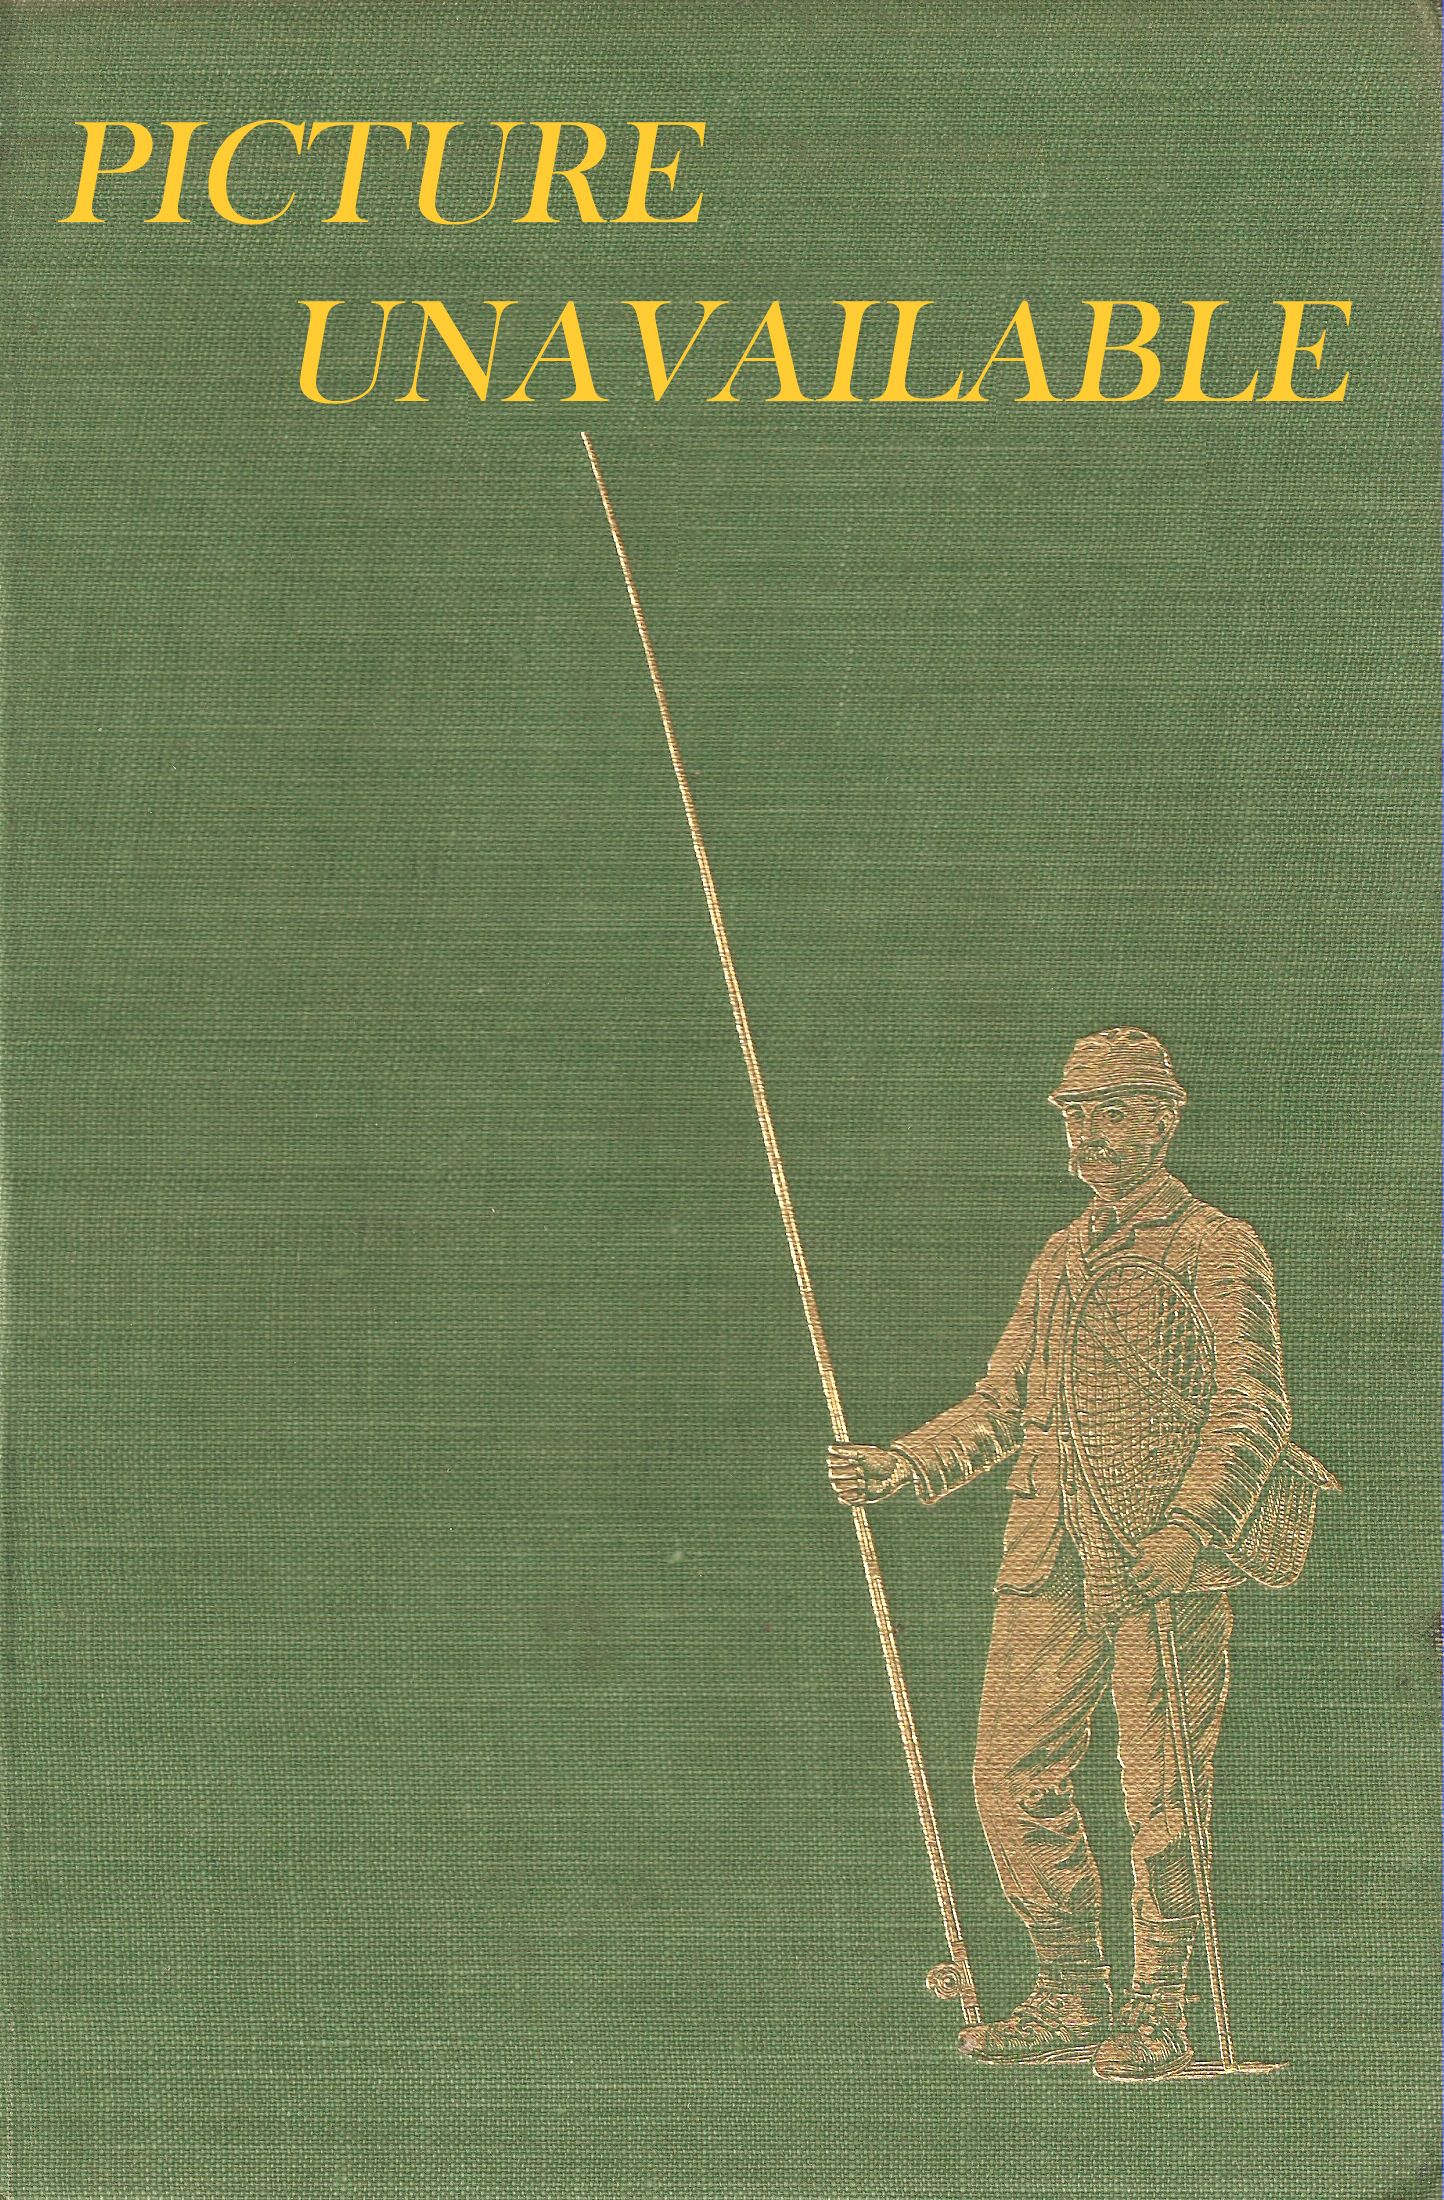 MY LIFE AS AN ANGLER. By William Henderson. (1880).